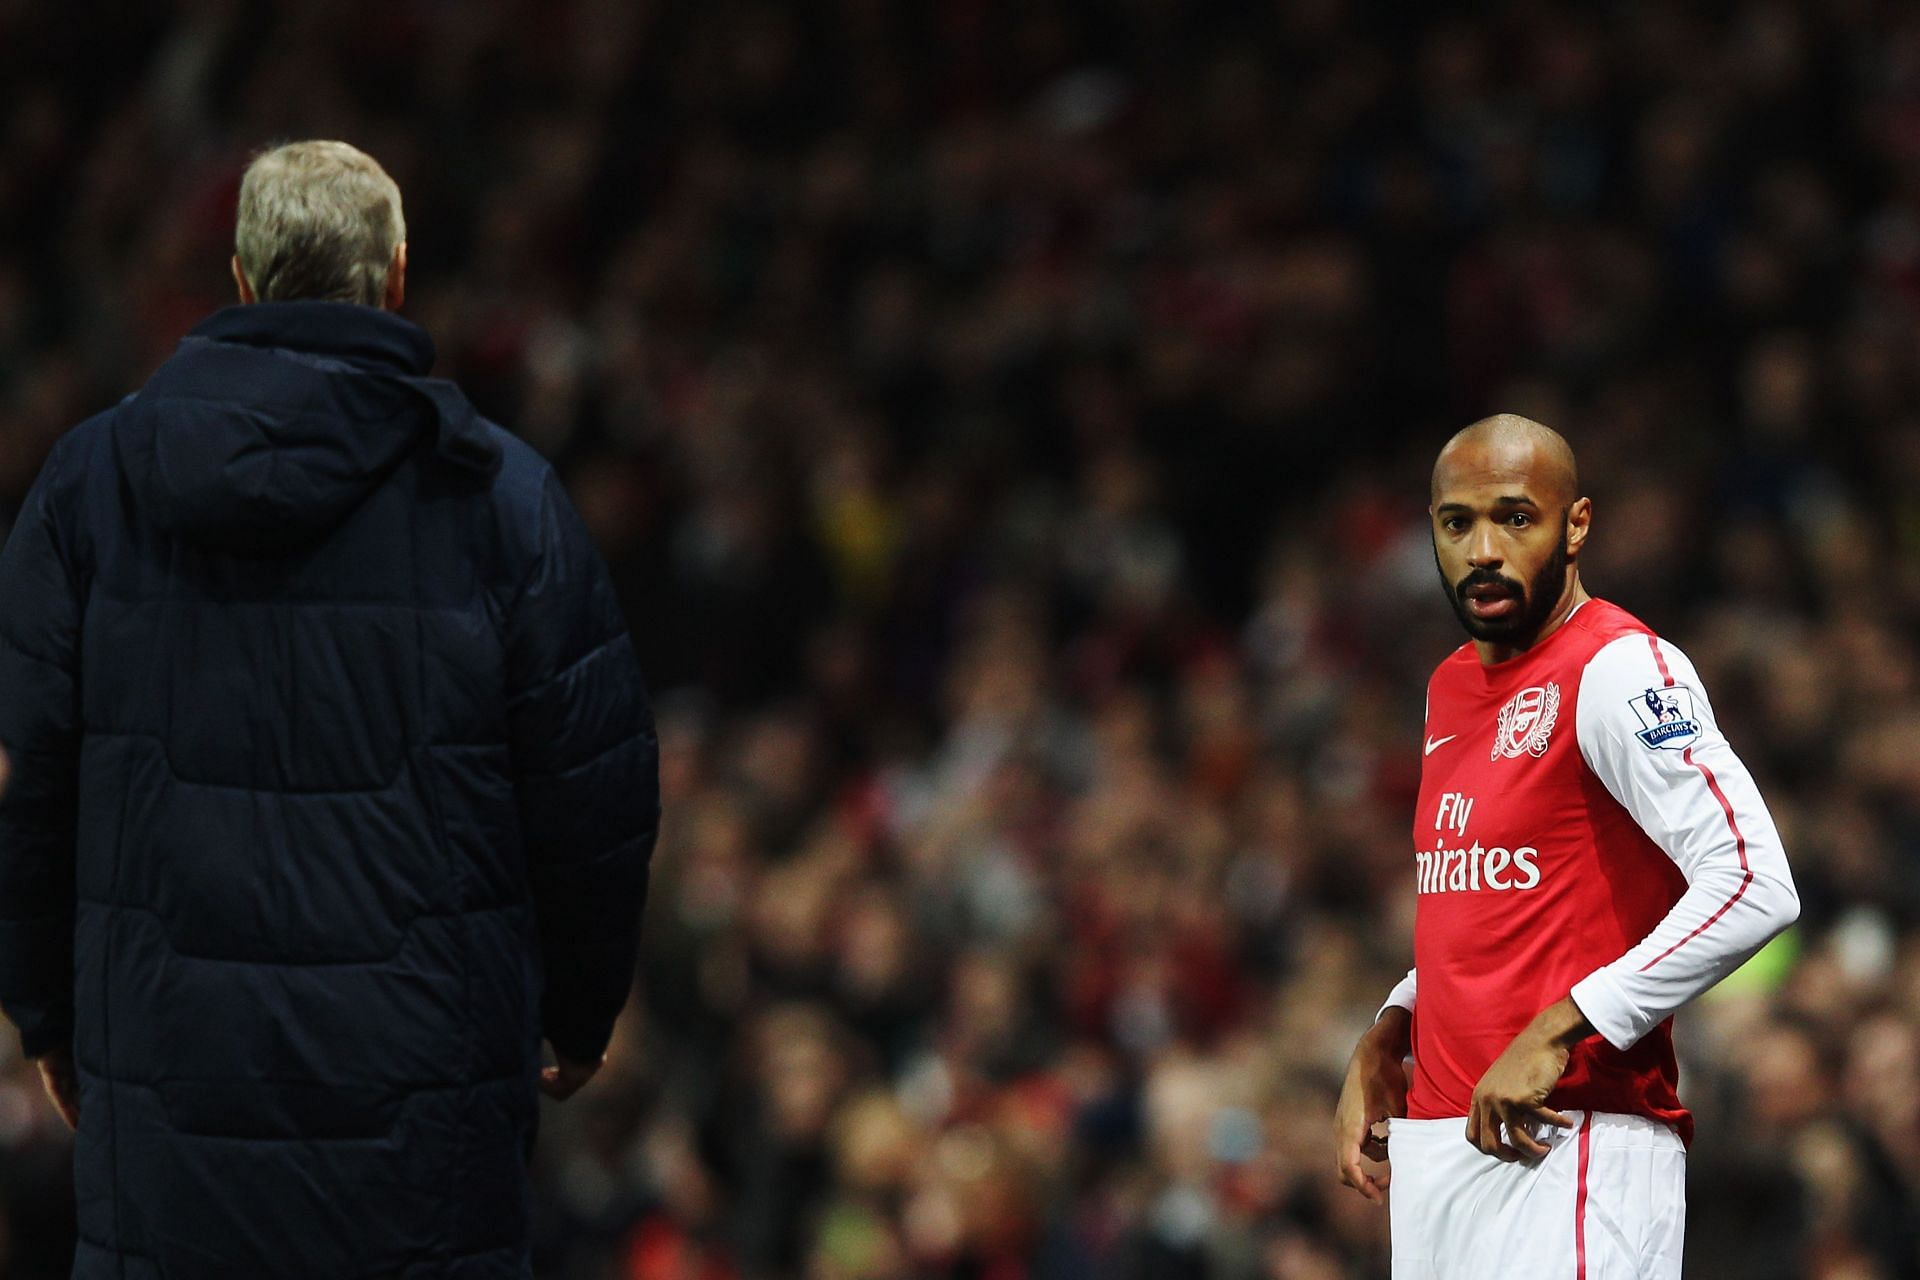 Thierry Henry (right) is arguably the best player managed by Arsene Wenger (left).